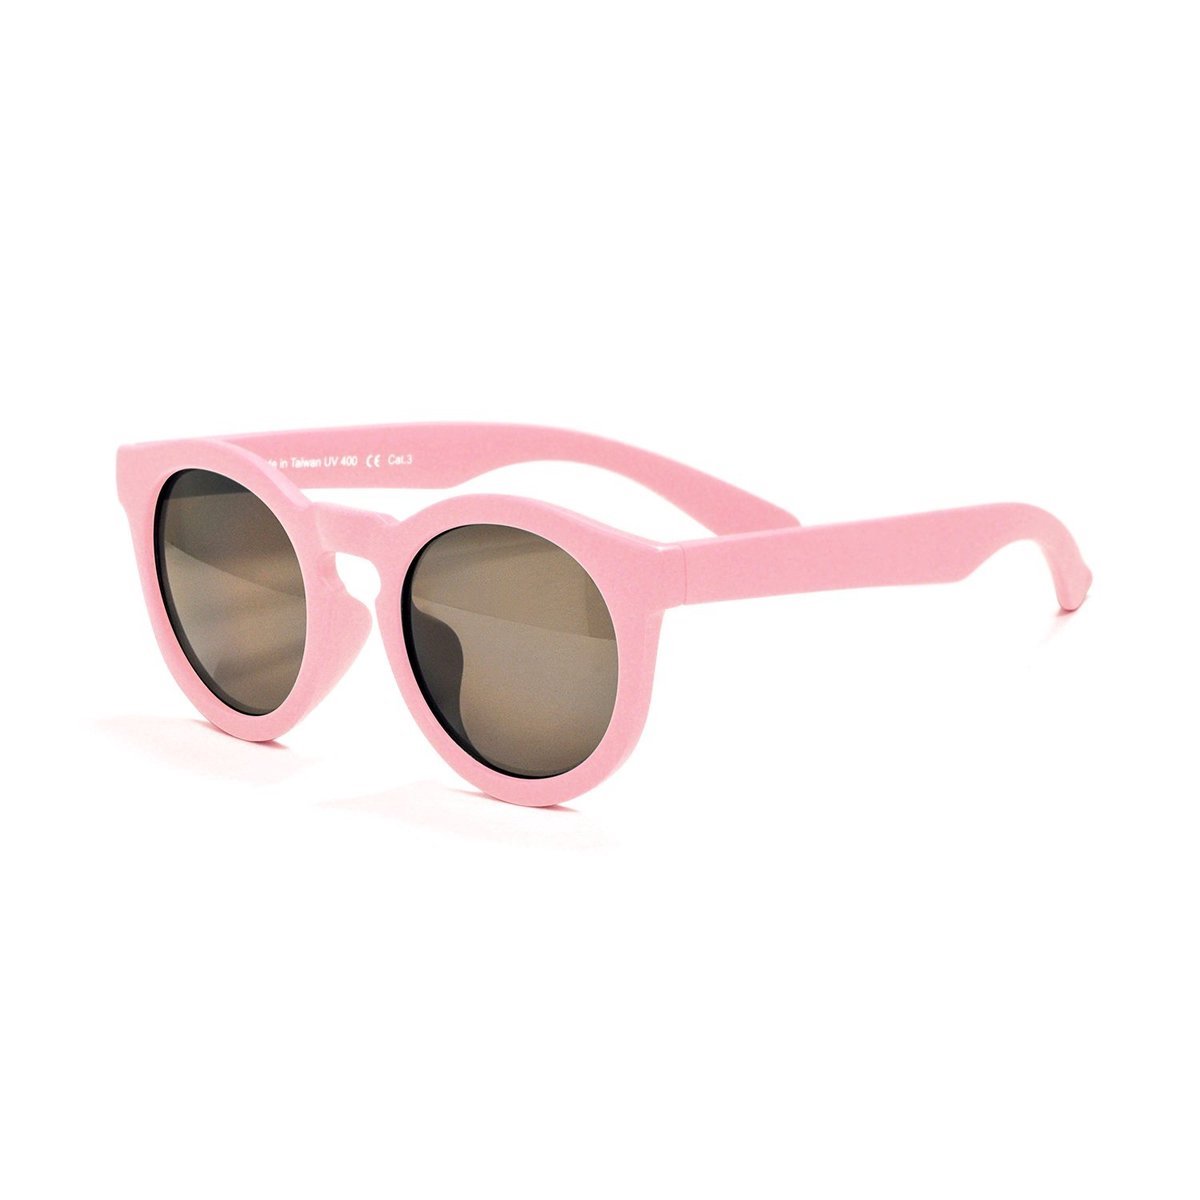 Real Shades - UV-zonnebril voor kinderen - Chill - Dusty Roze - maat Onesize (2-4yrs)